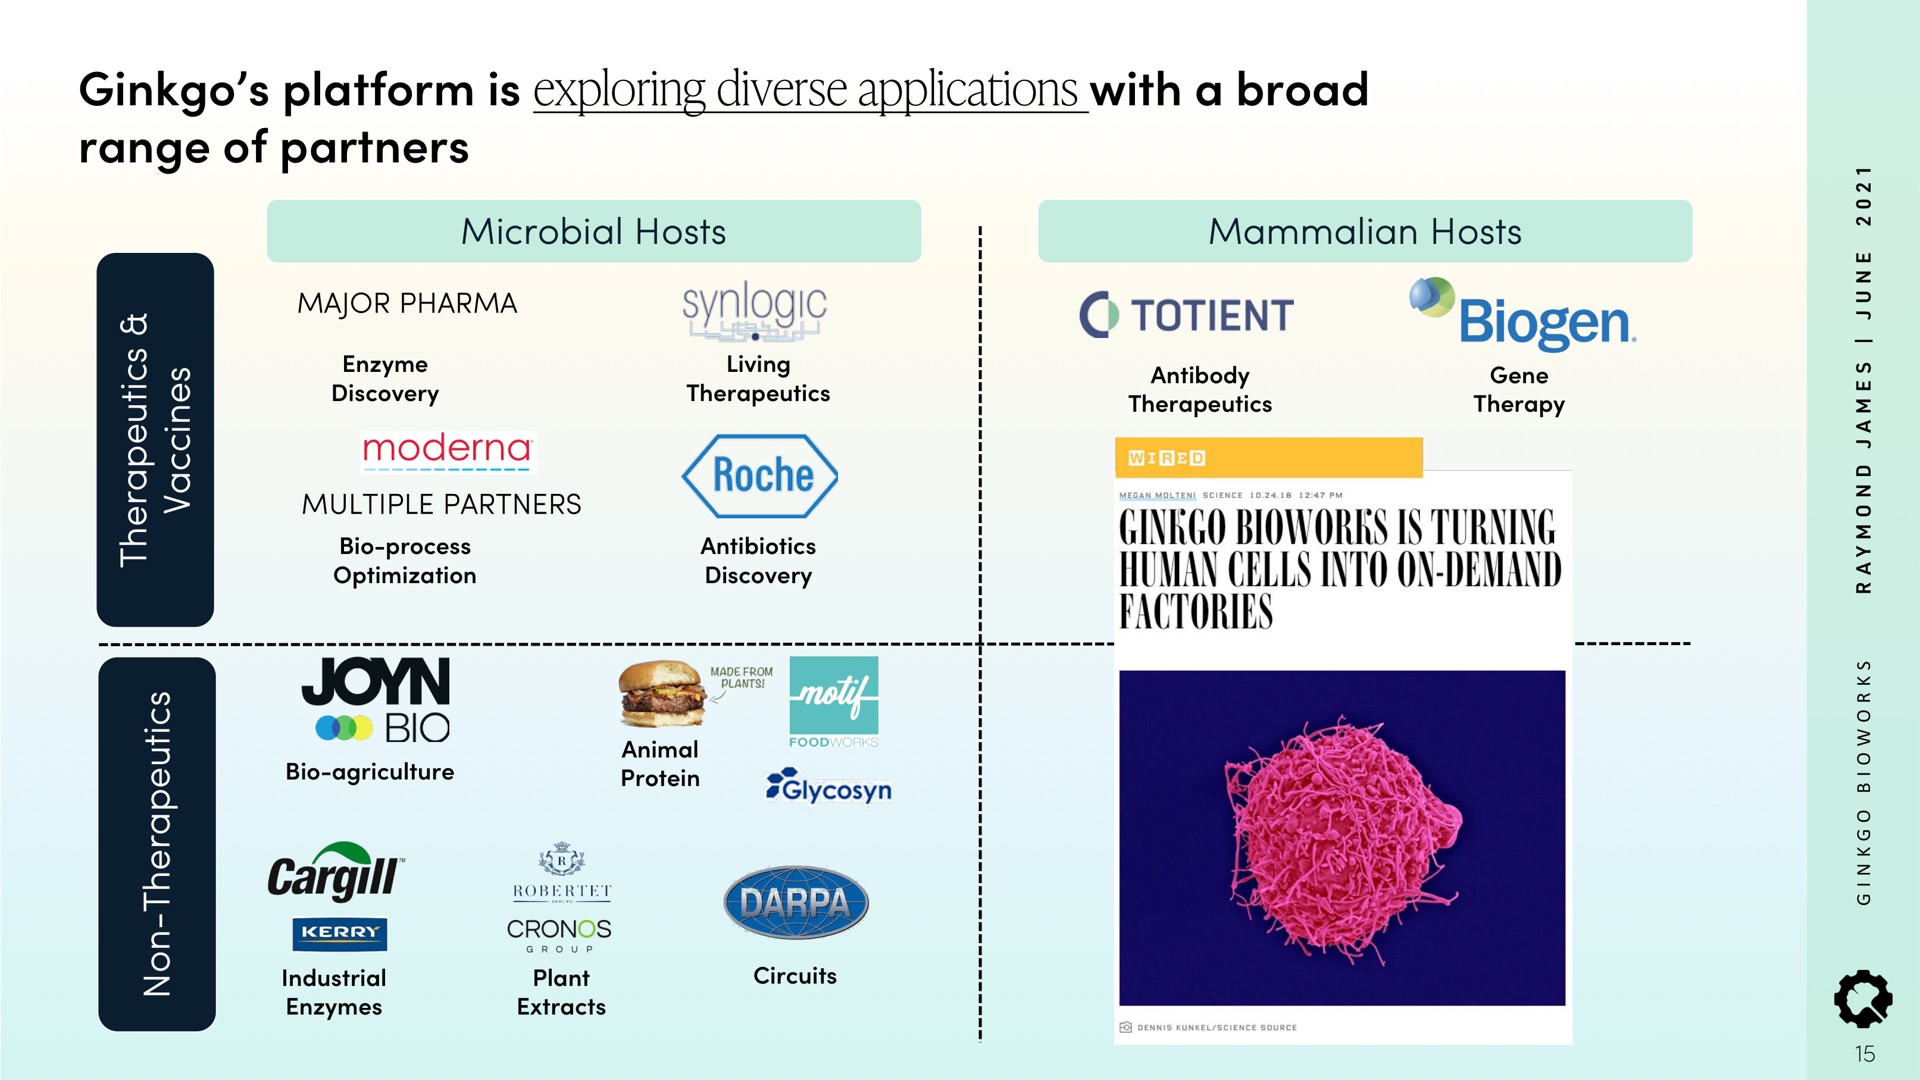 ginkgo platform is exploring diverse applications with a broad range of partners totient biogen turning human cells into on demand factories | Ginkgo